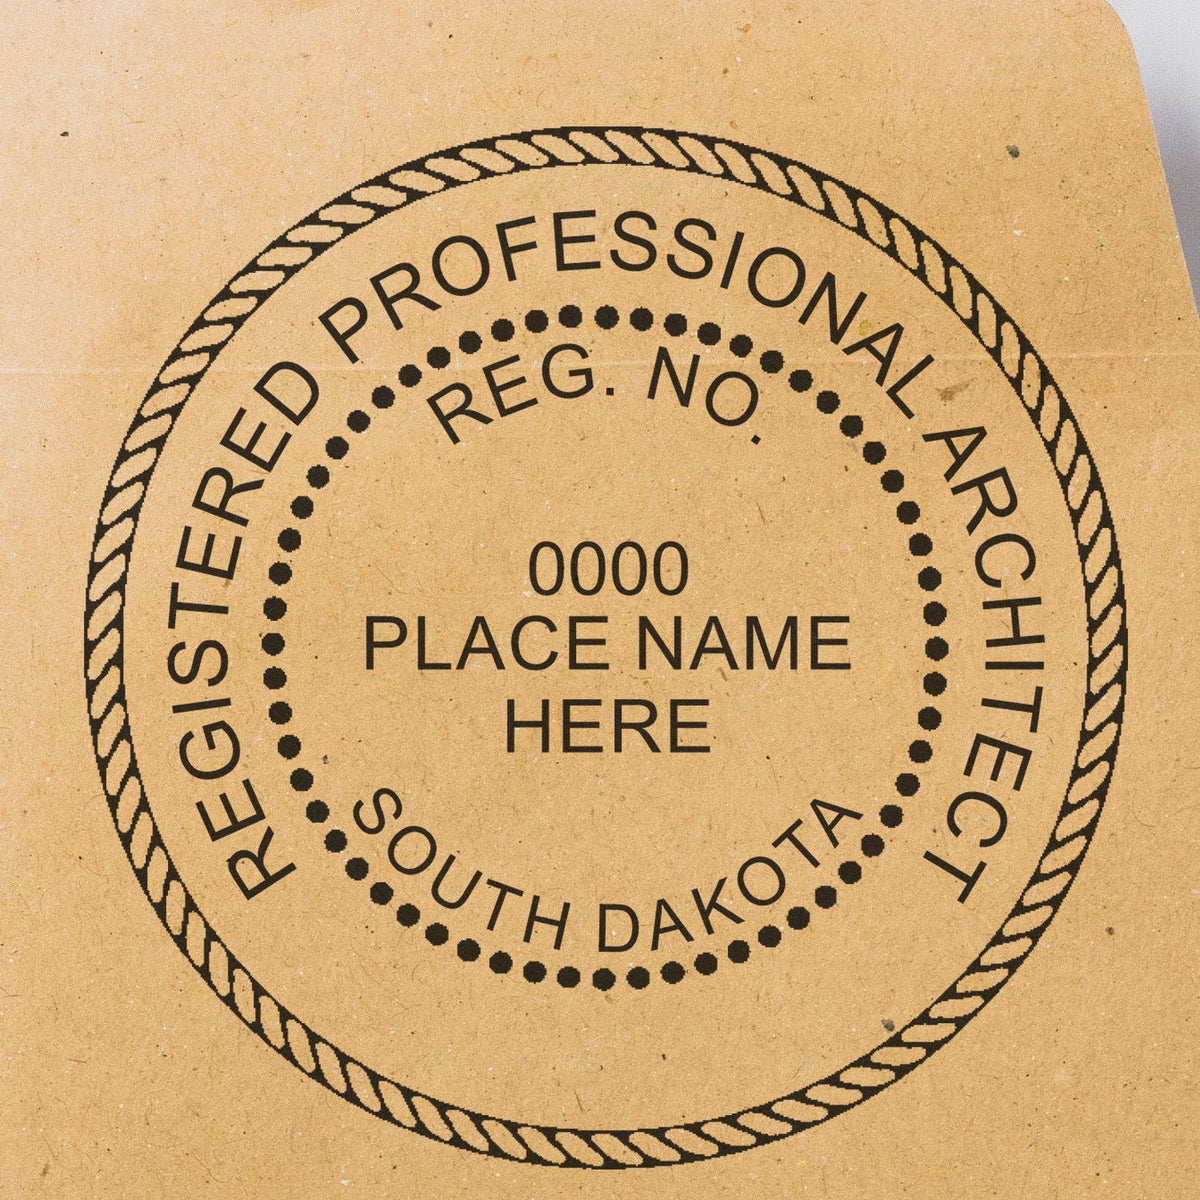 Slim Pre-Inked South Dakota Architect Seal Stamp in use photo showing a stamped imprint of the Slim Pre-Inked South Dakota Architect Seal Stamp